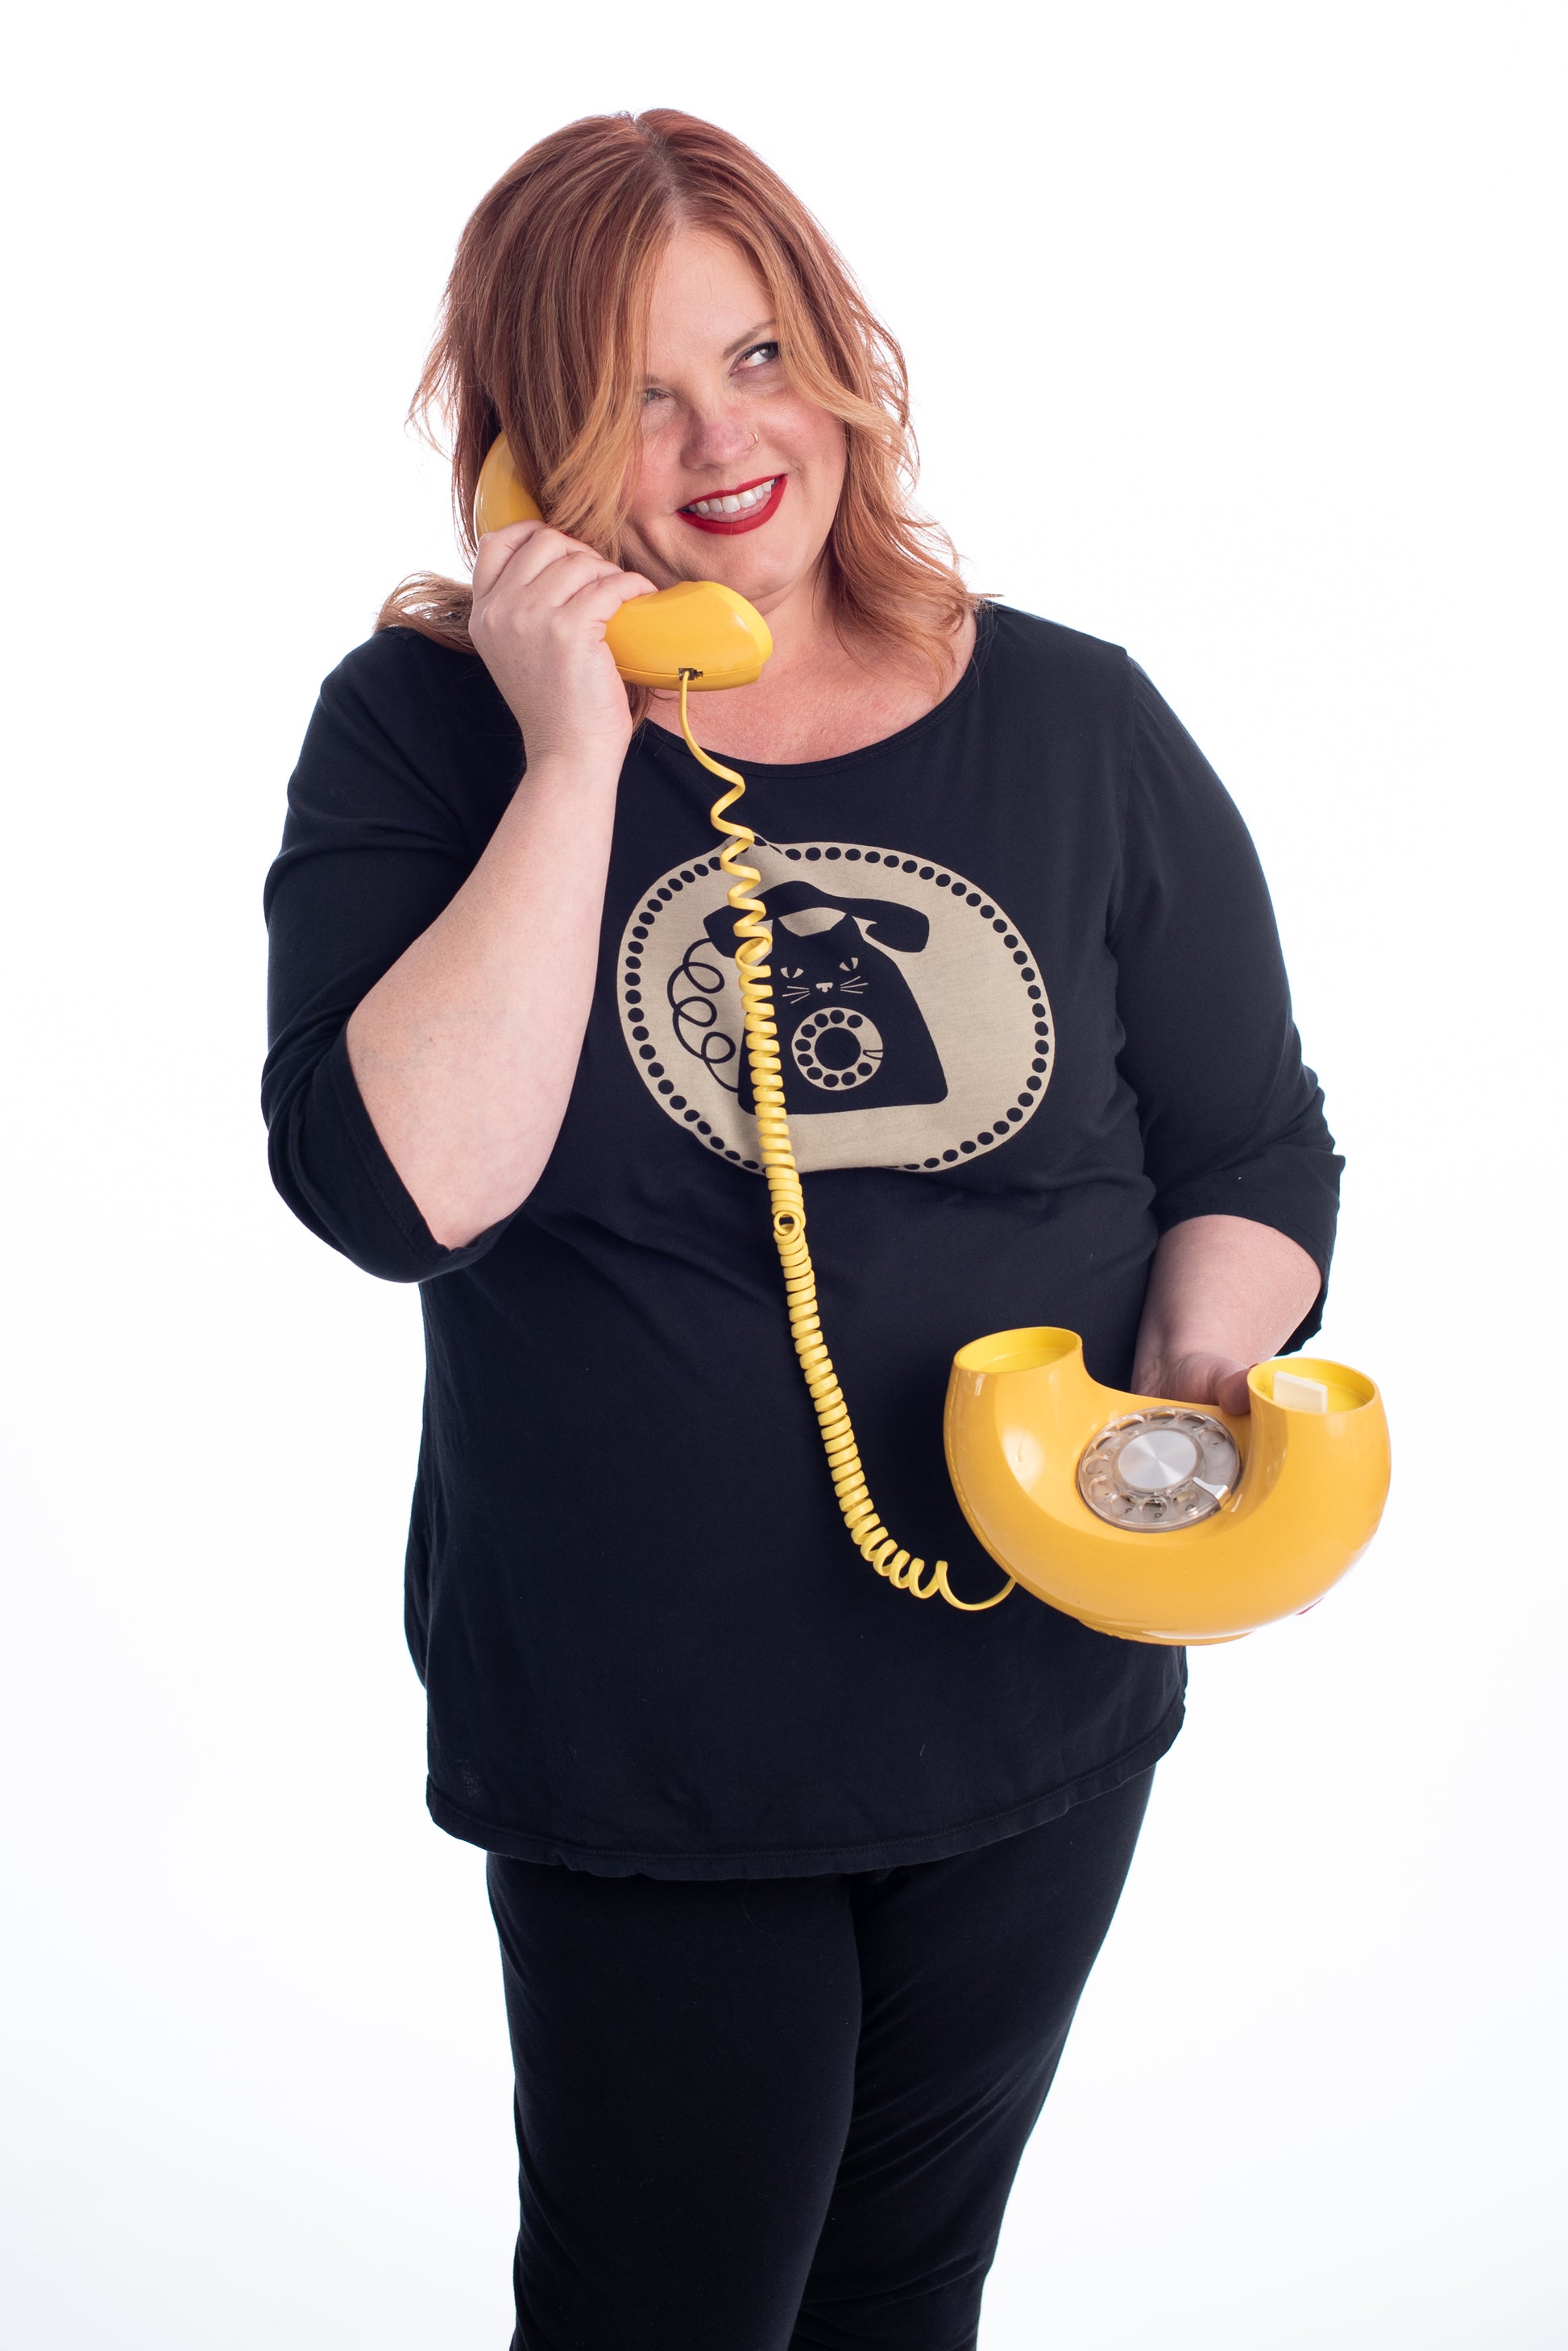 Red haired plus size model talking on donut phone while wearing black cat phone graphic 3/4 sleeve tee